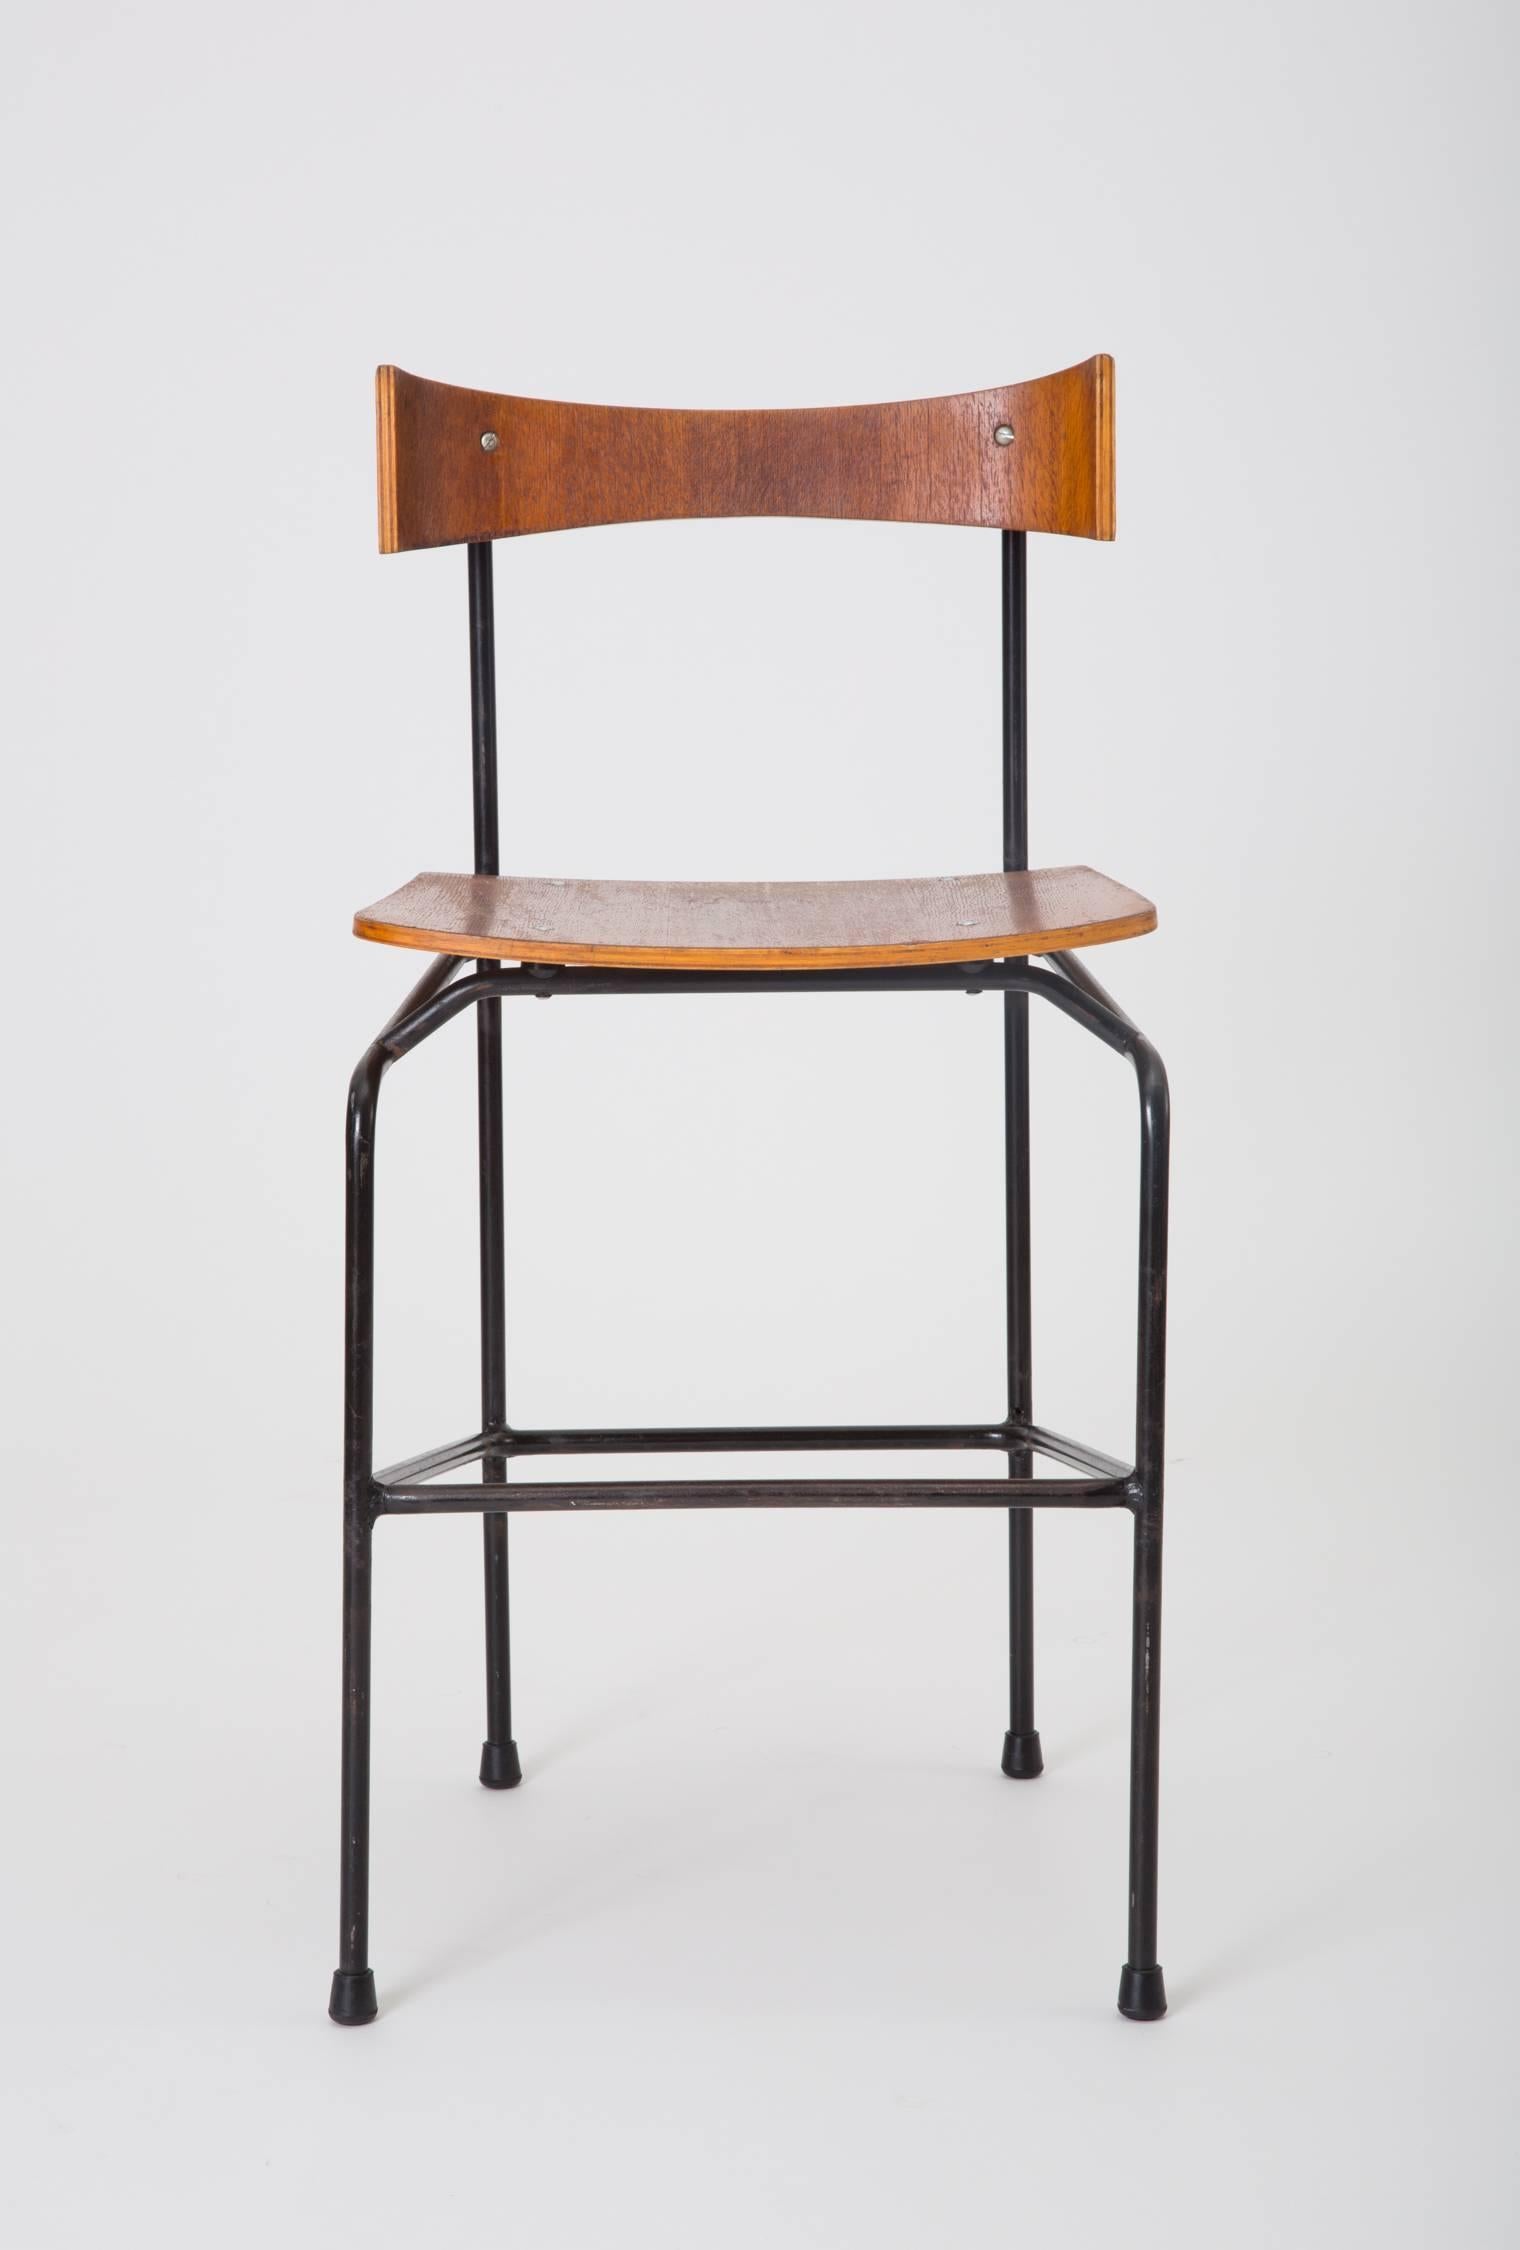 Jacques Seeuws Drafting Table and Chair for Swan 5